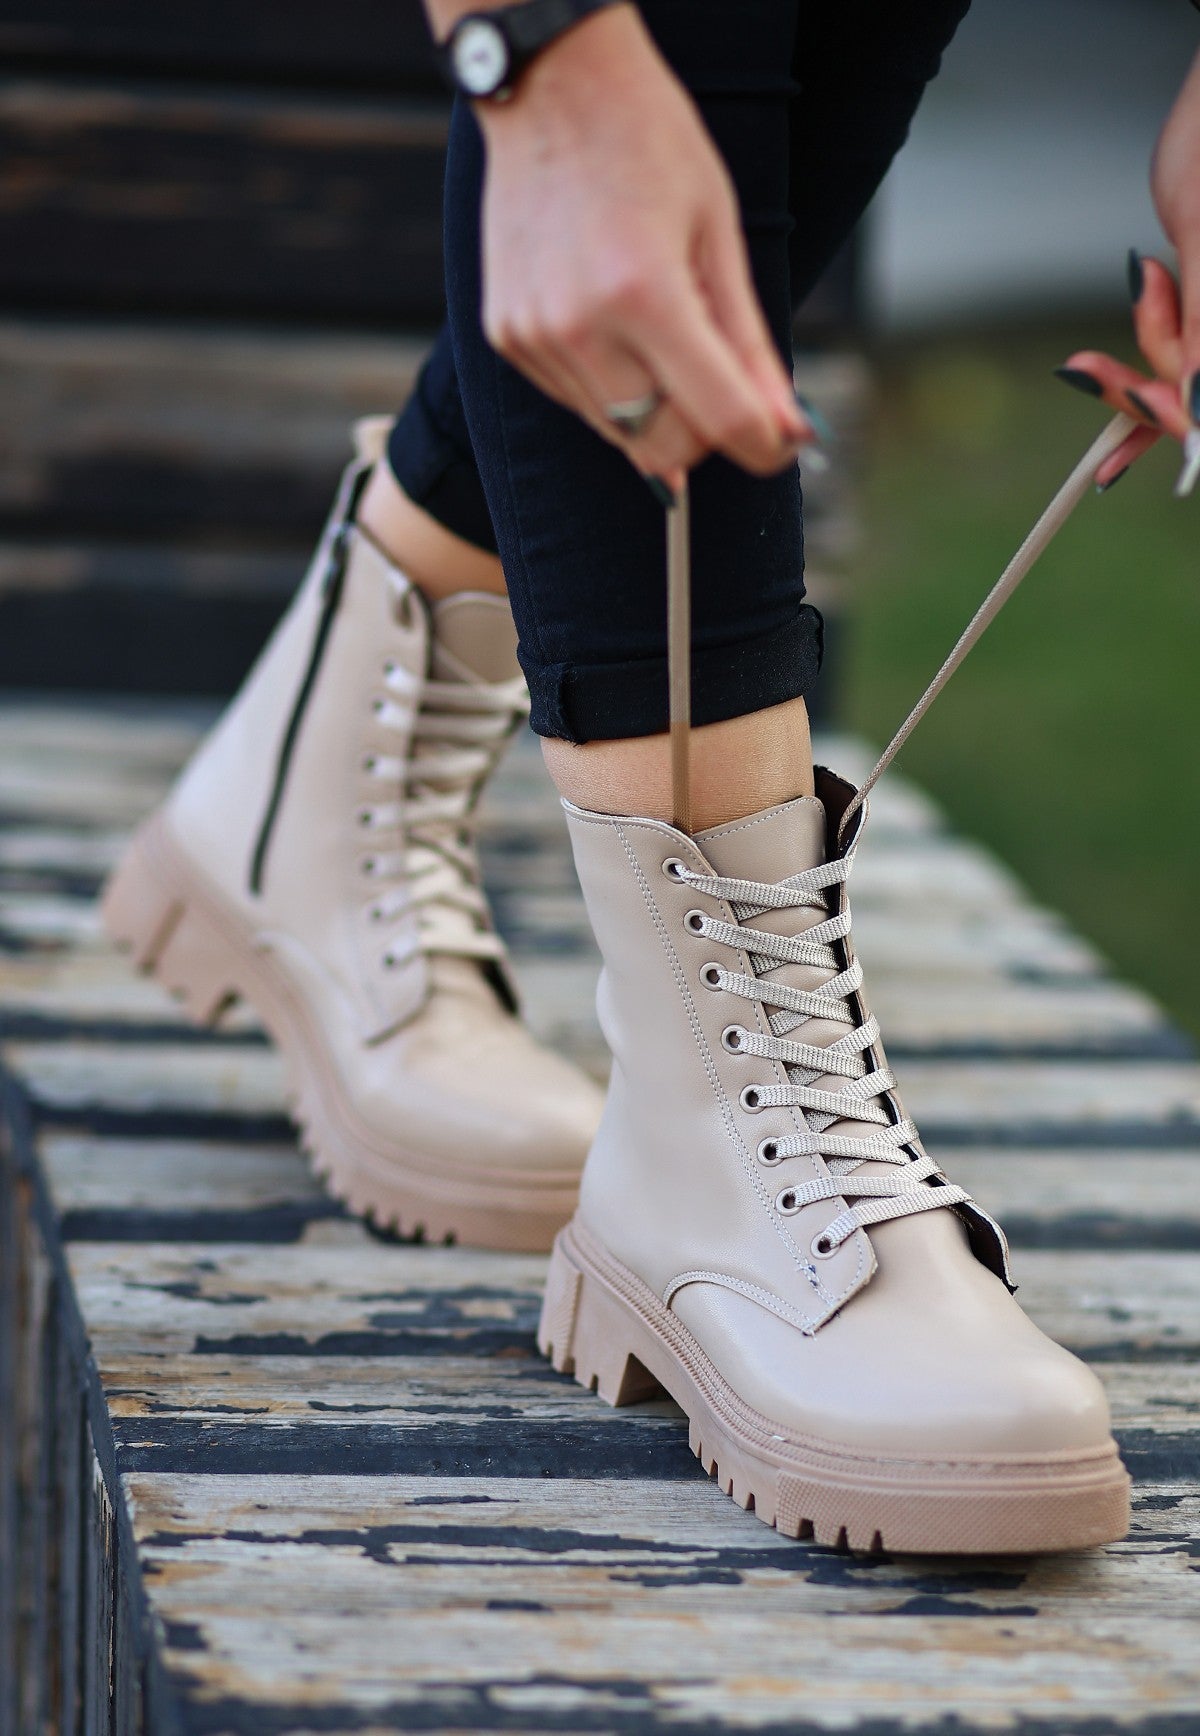 Women's Nude Skin Lace-up Boots - STREETMODE ™